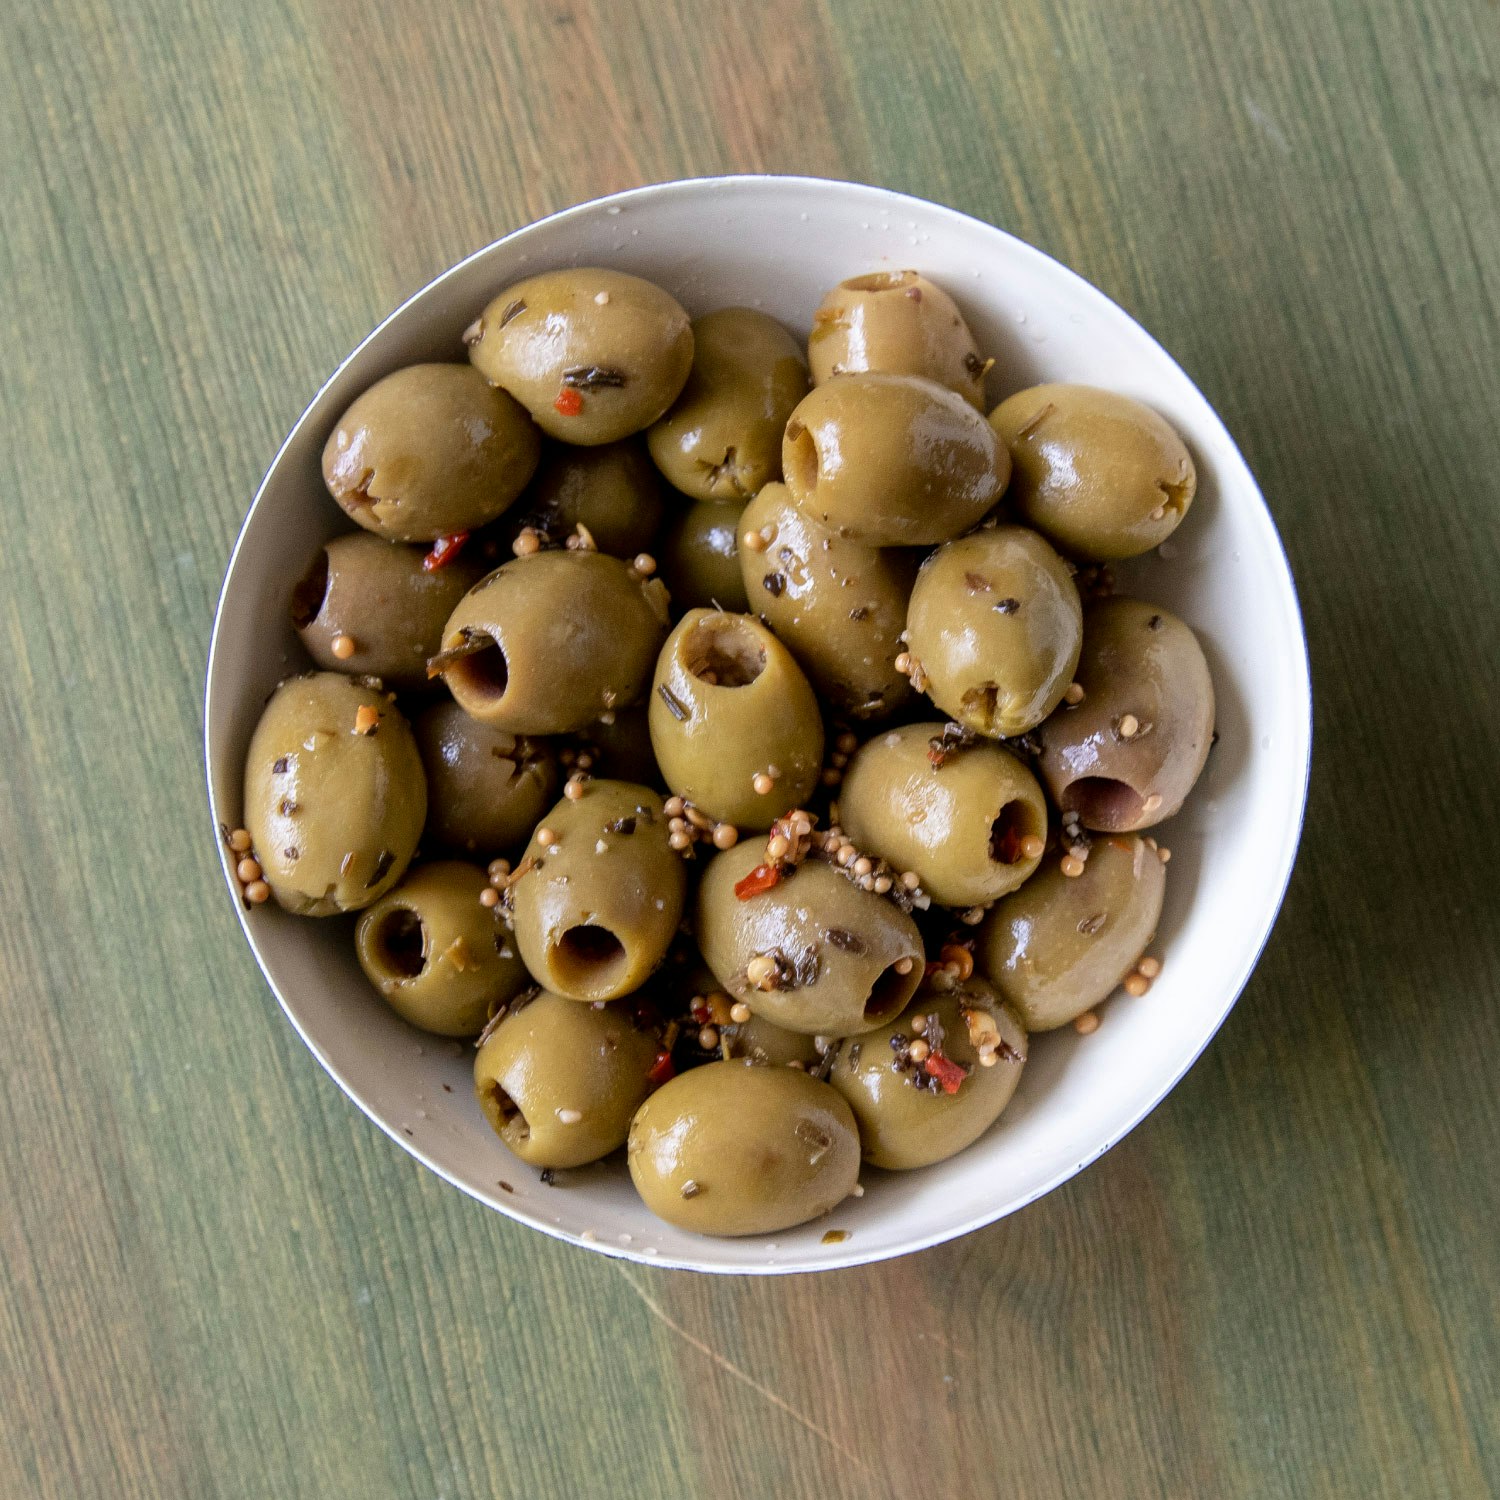 sicilian herb marinated olives pitted specialty foods